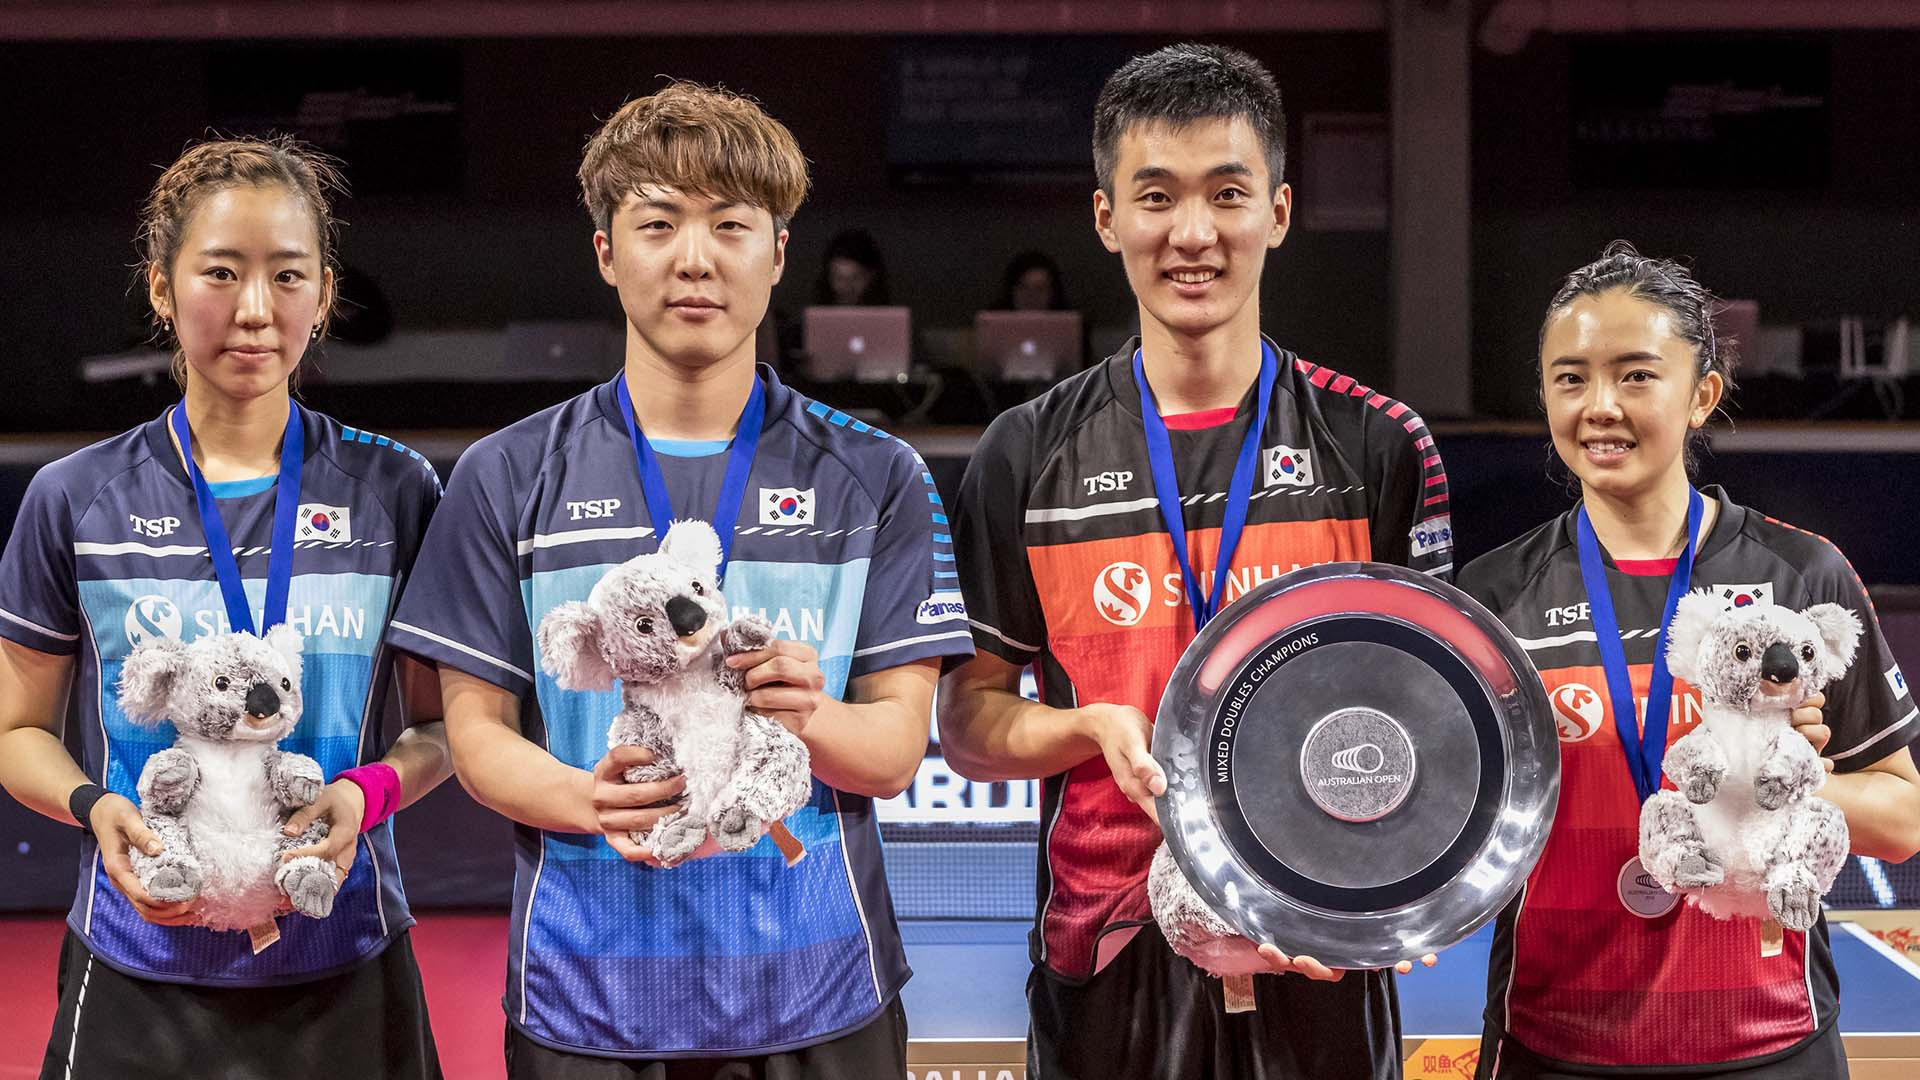 Top seeds Lee Sang-su and Jeon Ji-hee fought back from a game down to beat compatriots Lim Jong-hoon and Yang Hae-un to secure the mixed doubles title at the ITTF Australian Open ©ITTF/APAC Sport Media